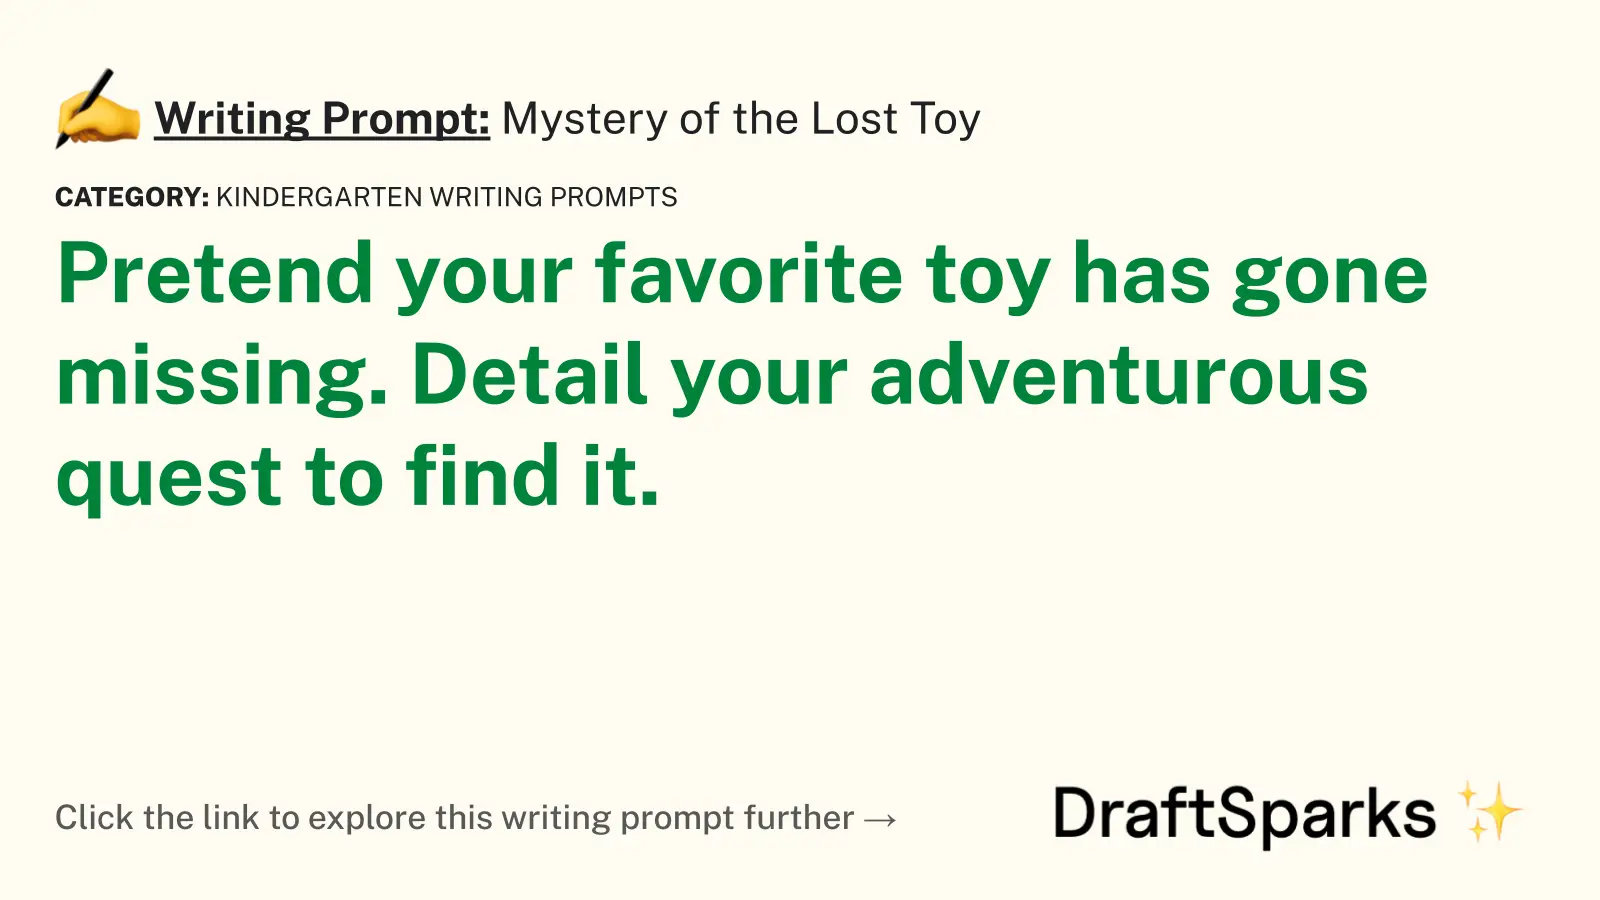 Mystery of the Lost Toy